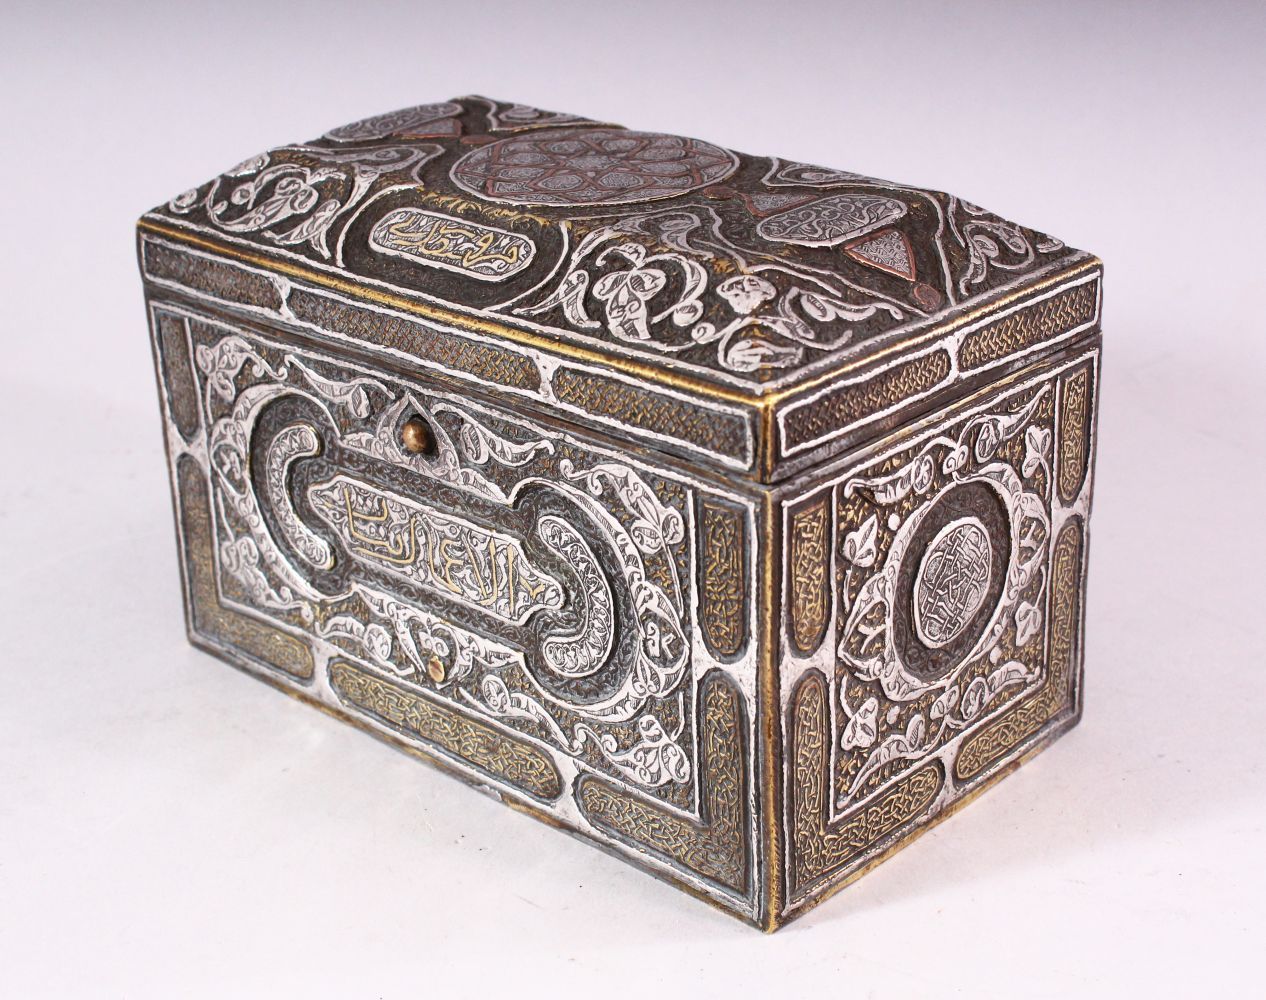 A GOOD 19TH CENTURY SYRIAN SILVER, COPPER AND BRASS RECTANGULAR CASKET, with panels of calligraphy